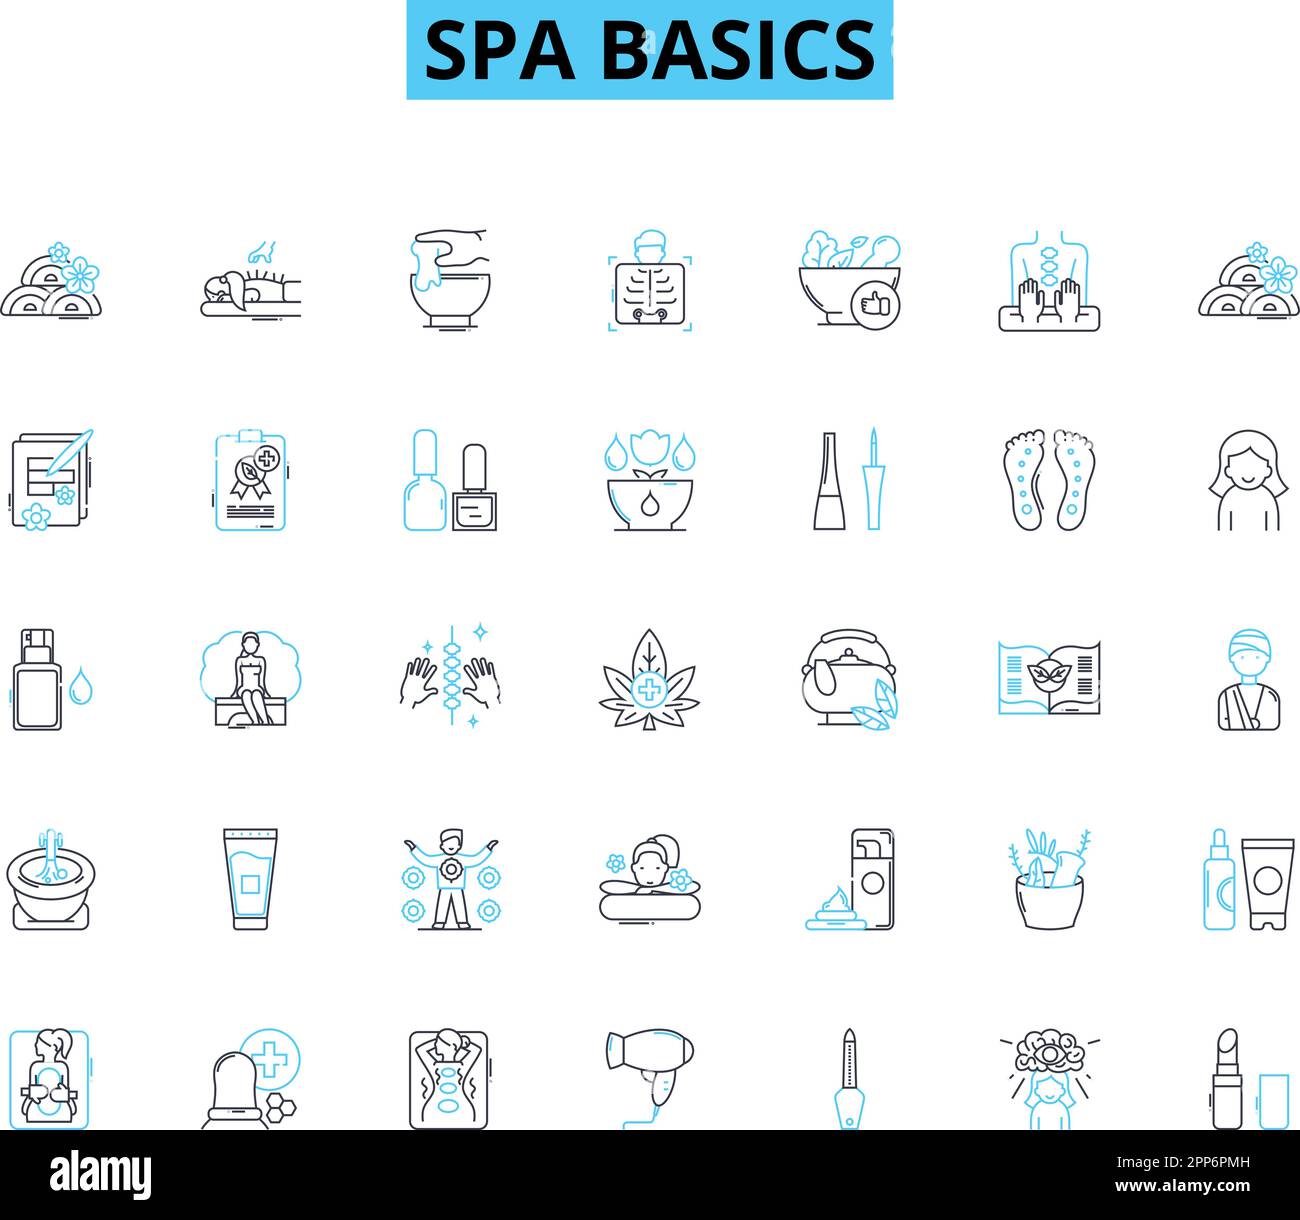 Spa basics linear icons set. Relaxation, Pampering, Massage, Soothing, Aromatherapy, Meditation, Skincare line vector and concept signs. Rejuvenation Stock Vector